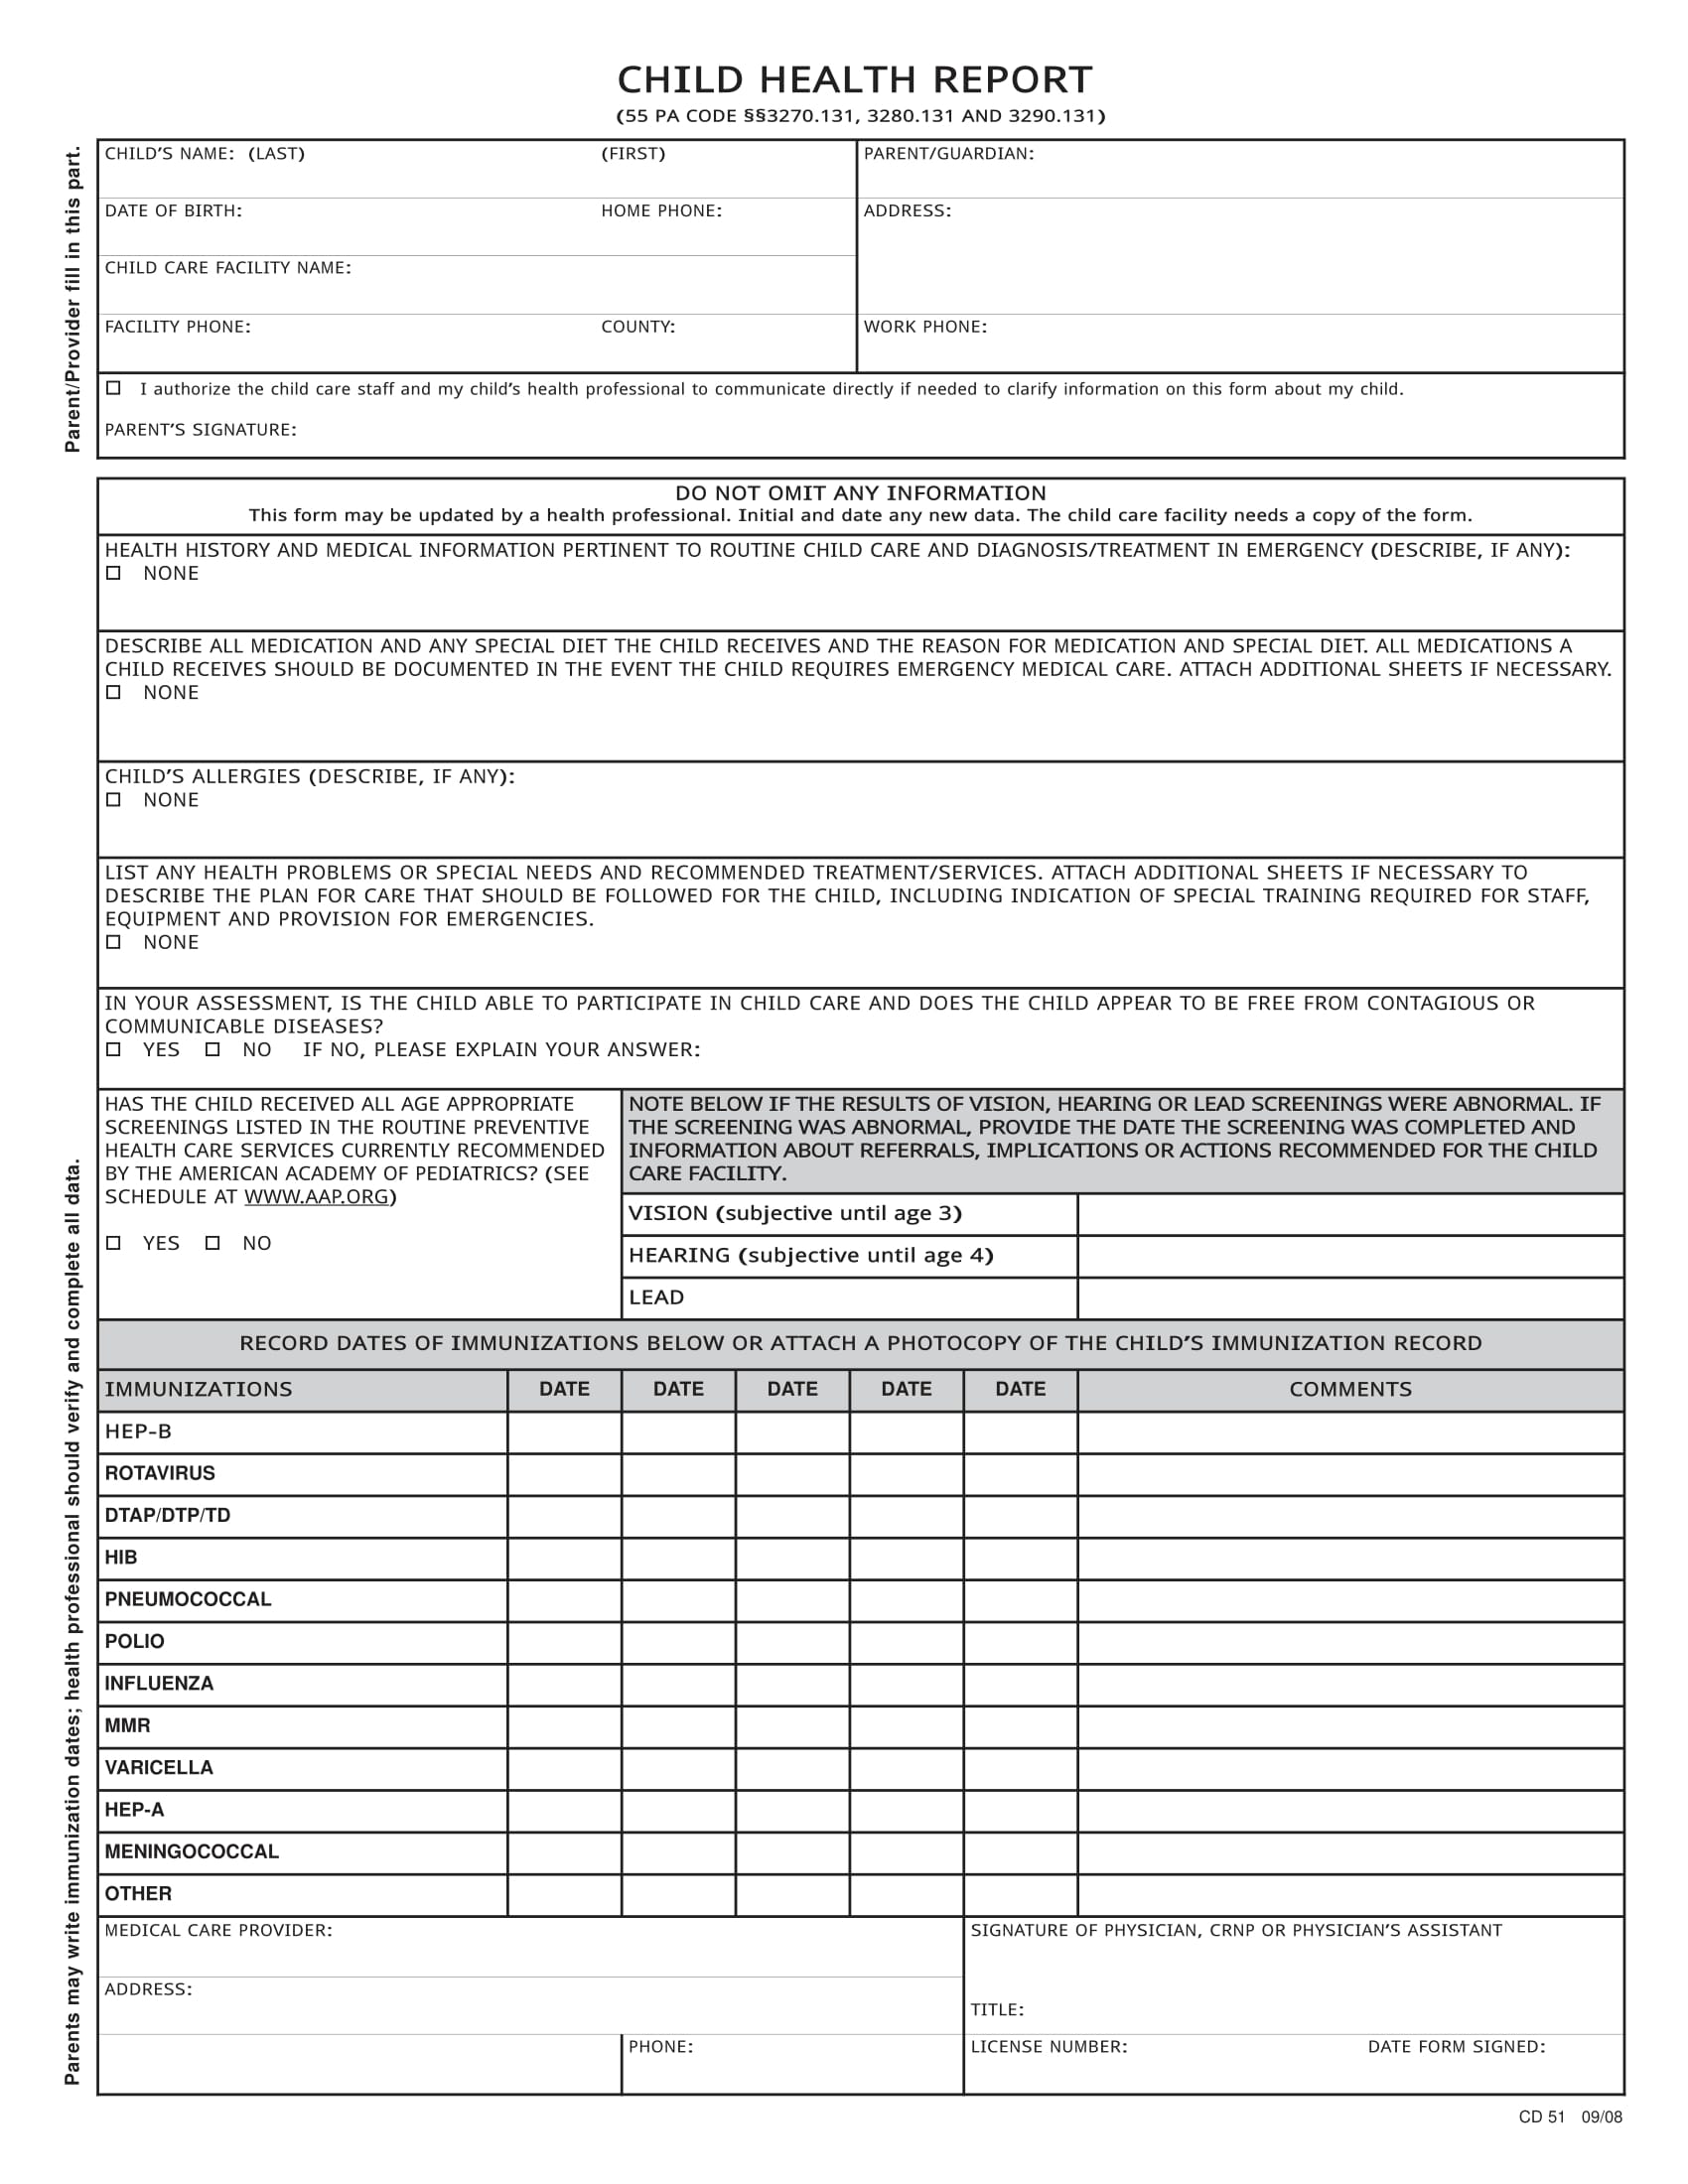 daycare child health report information form 1